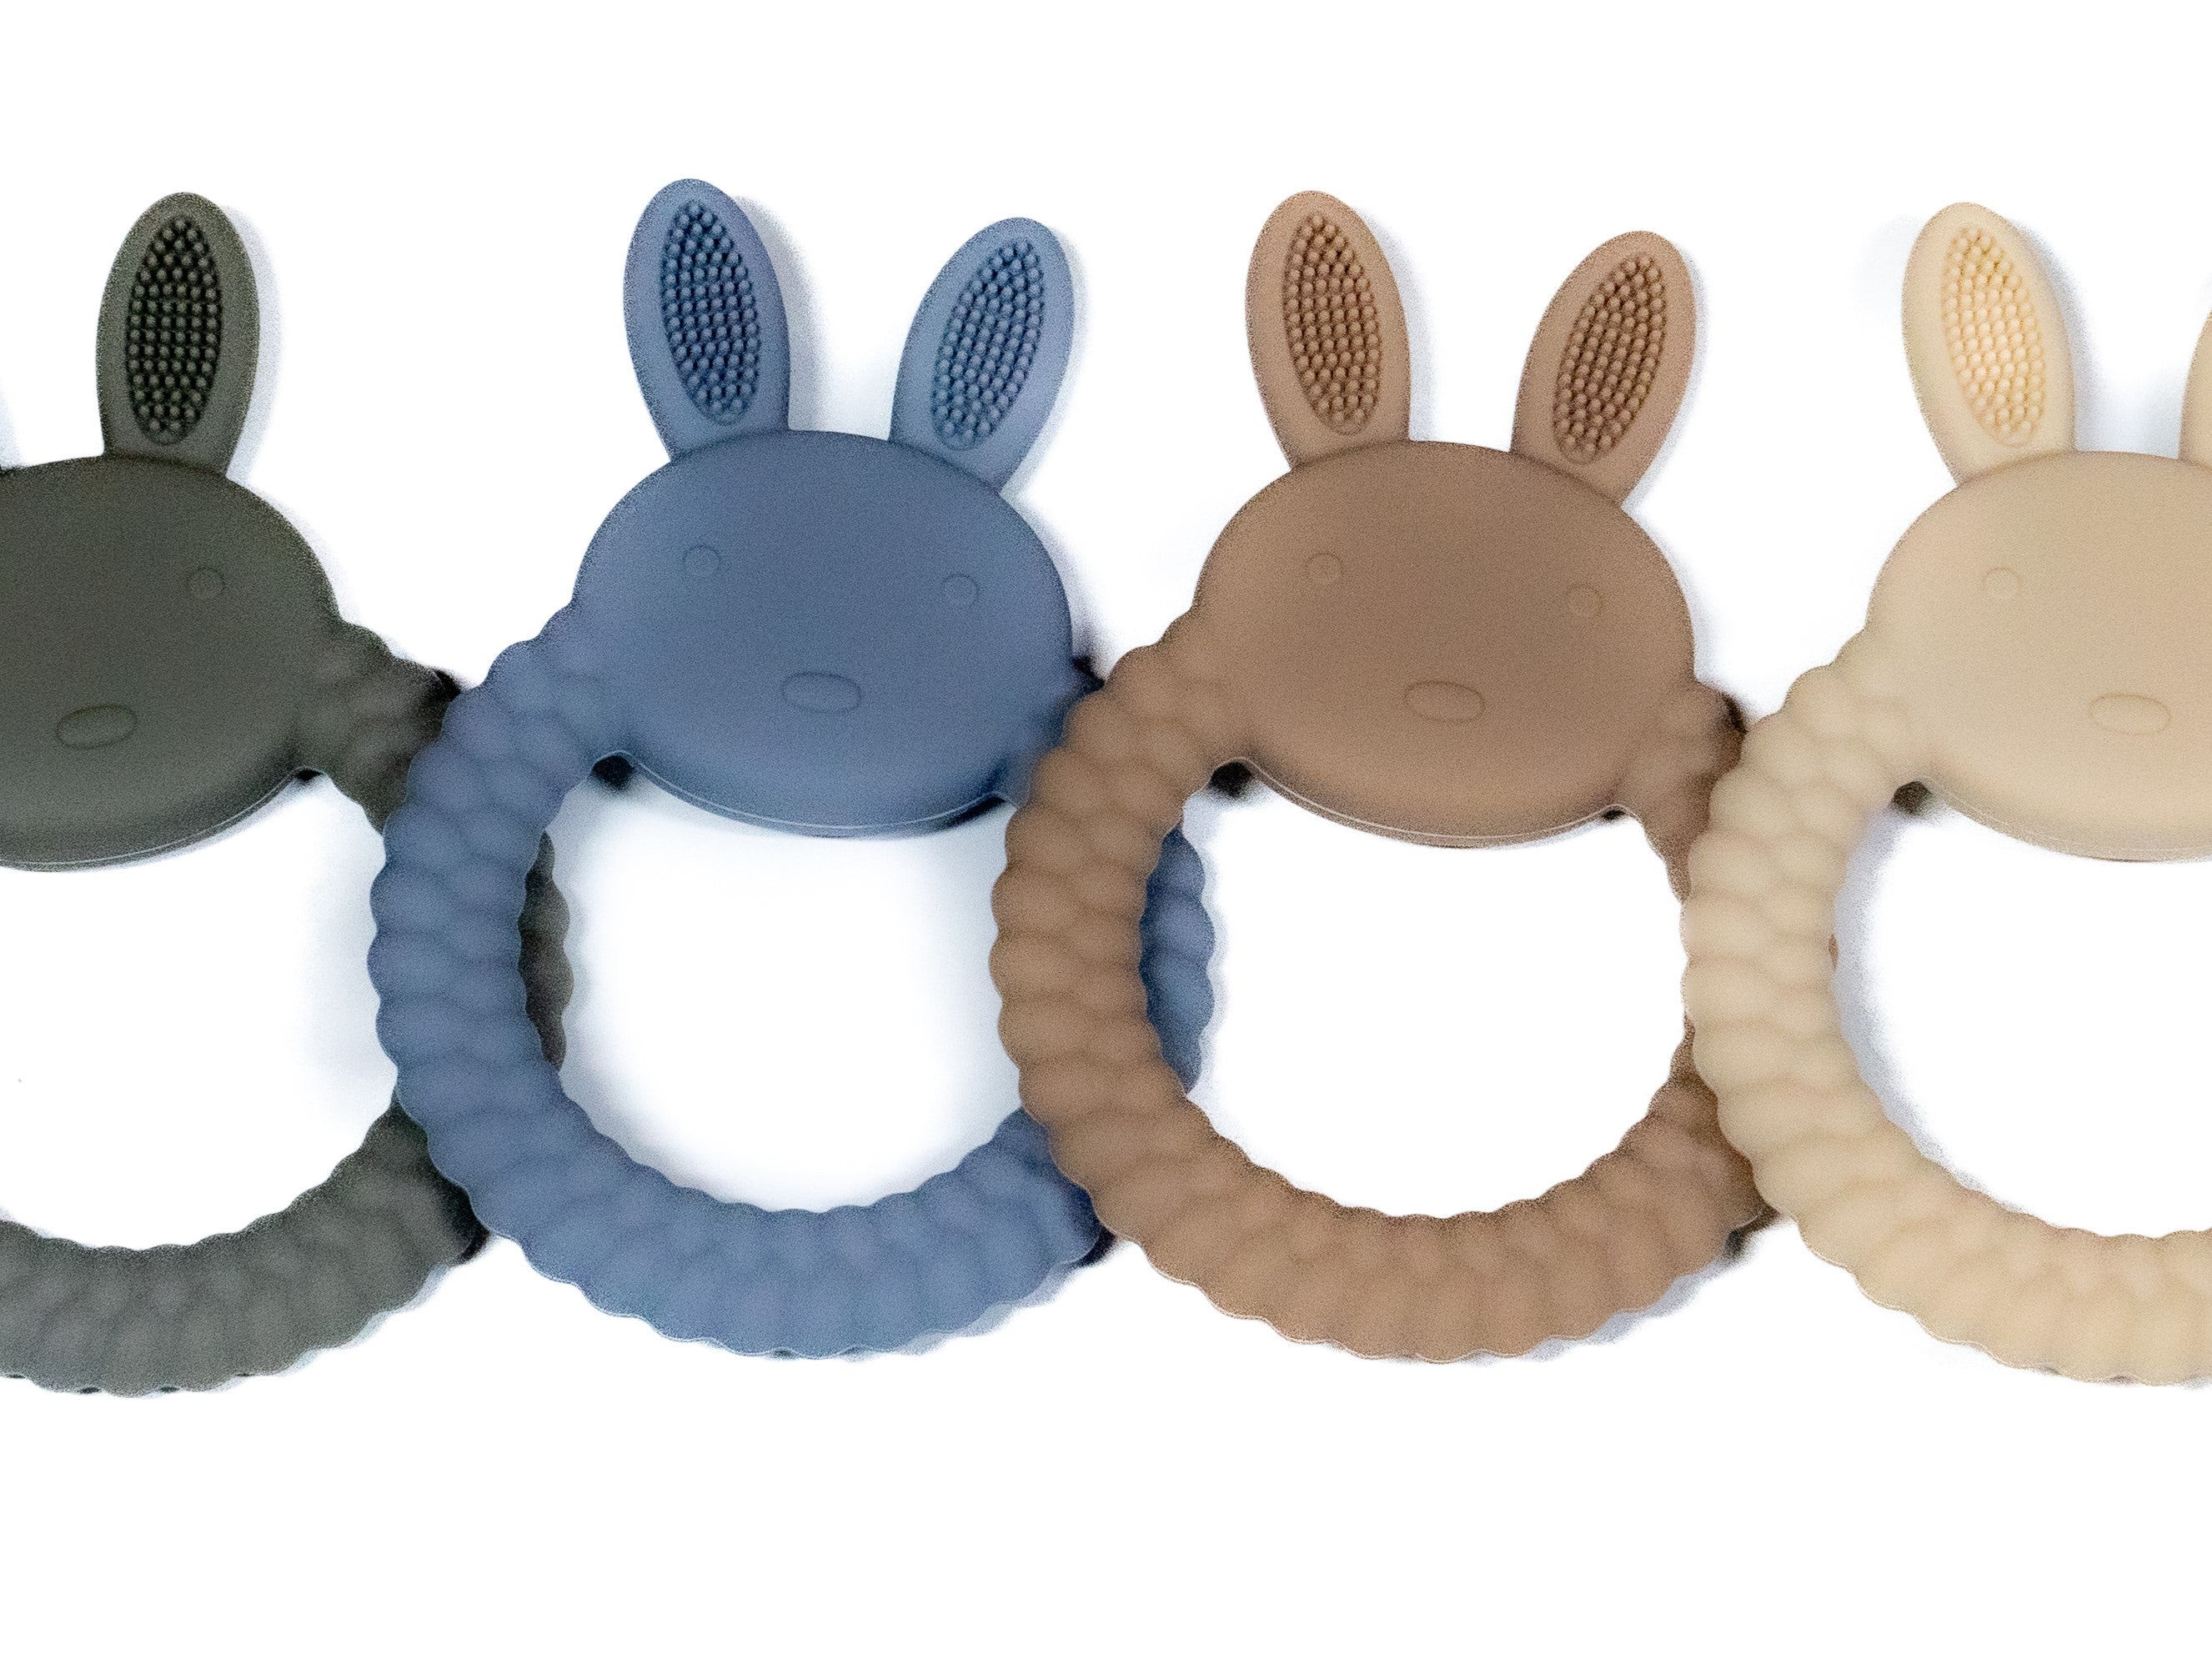 Hatched Silicone Baby Teether